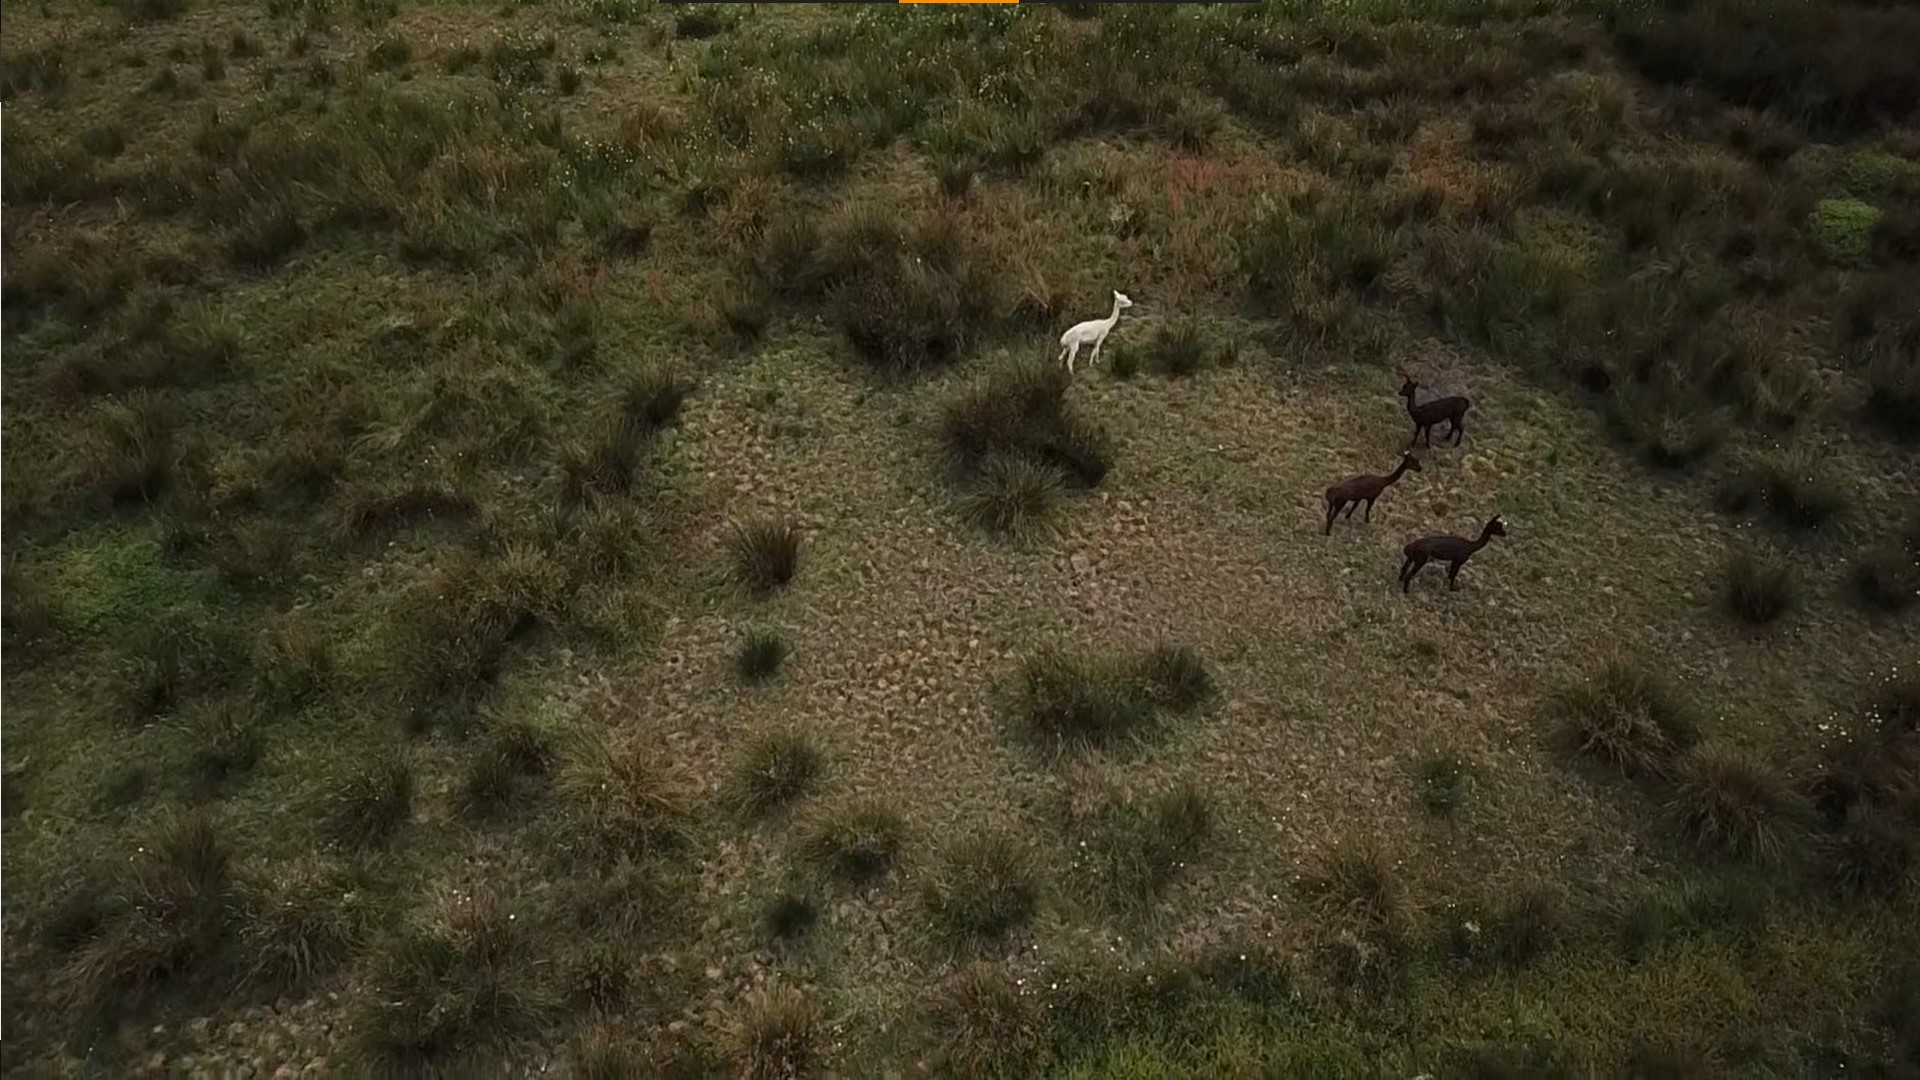 Aerial view of some alpacas in a green paddock